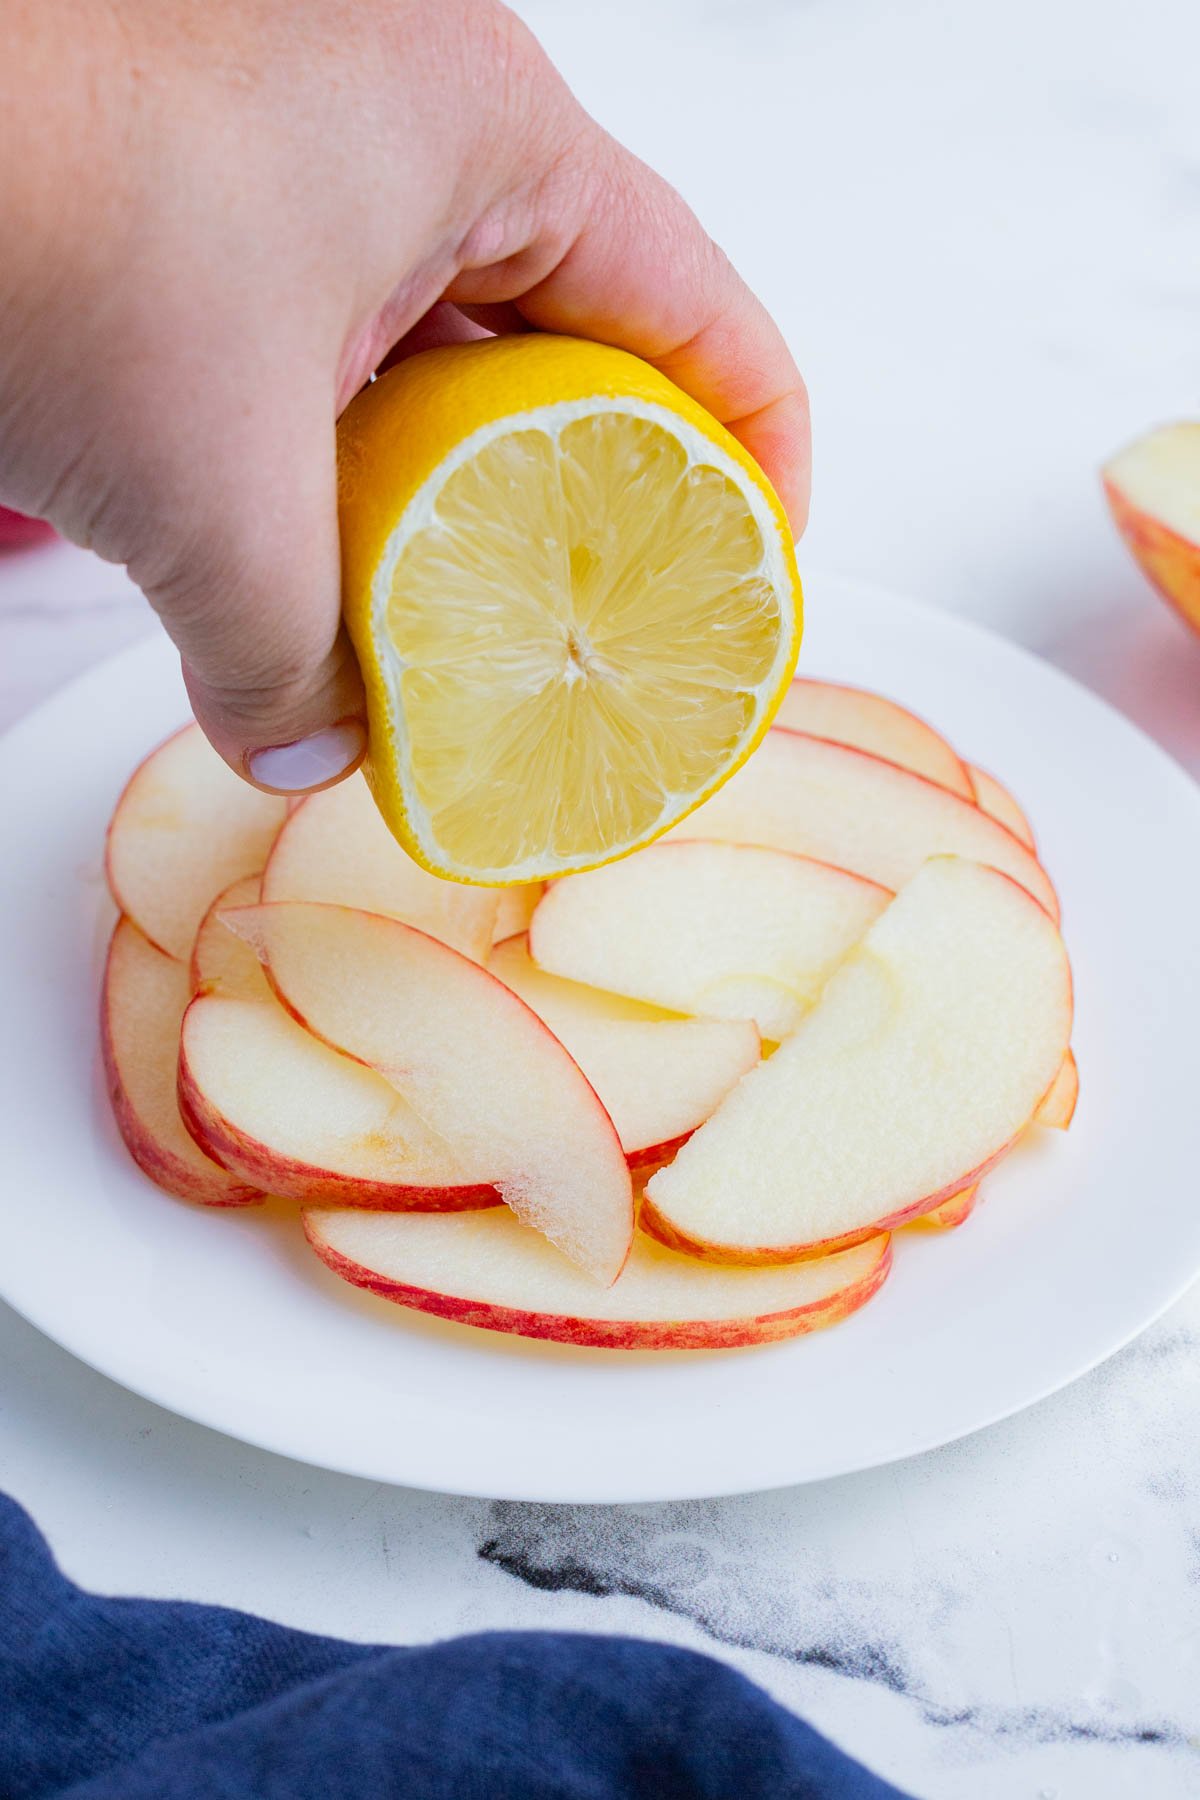 Lemon being squeezed over thinly sliced apples on a white plate.